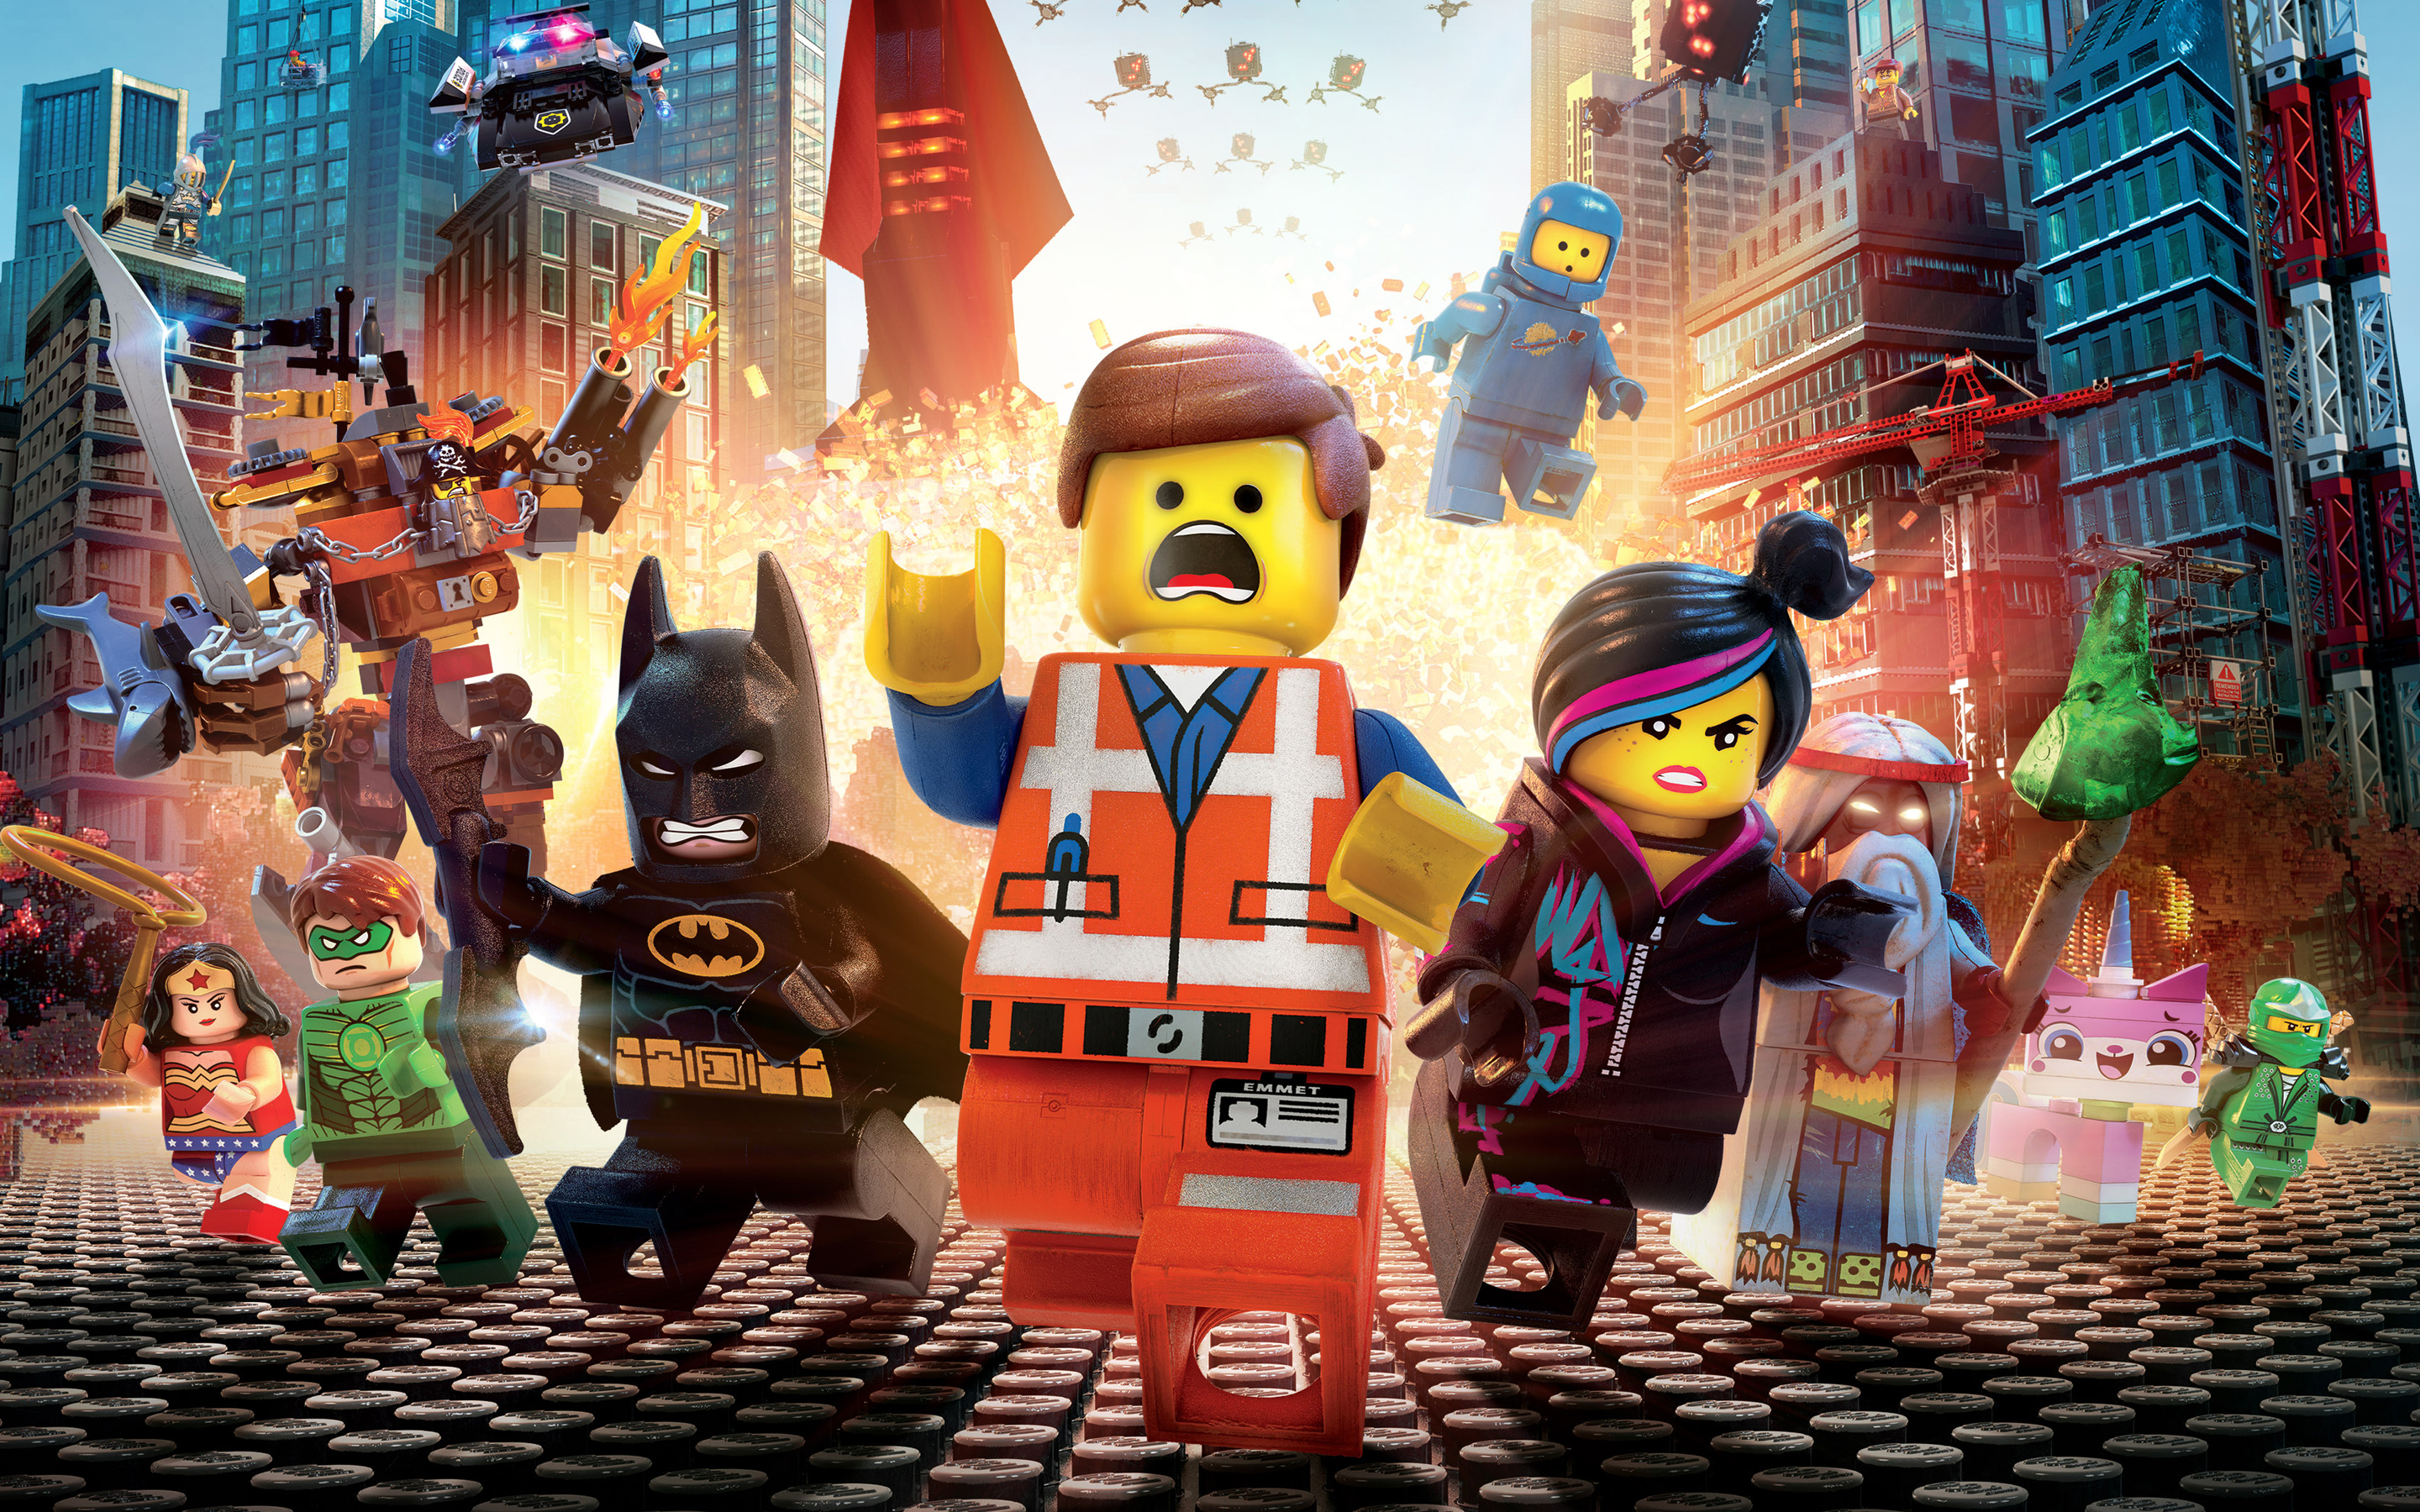 Exclusive: Win Two Tickets to the . Premiere of 'The Lego Movie' |  Fandango